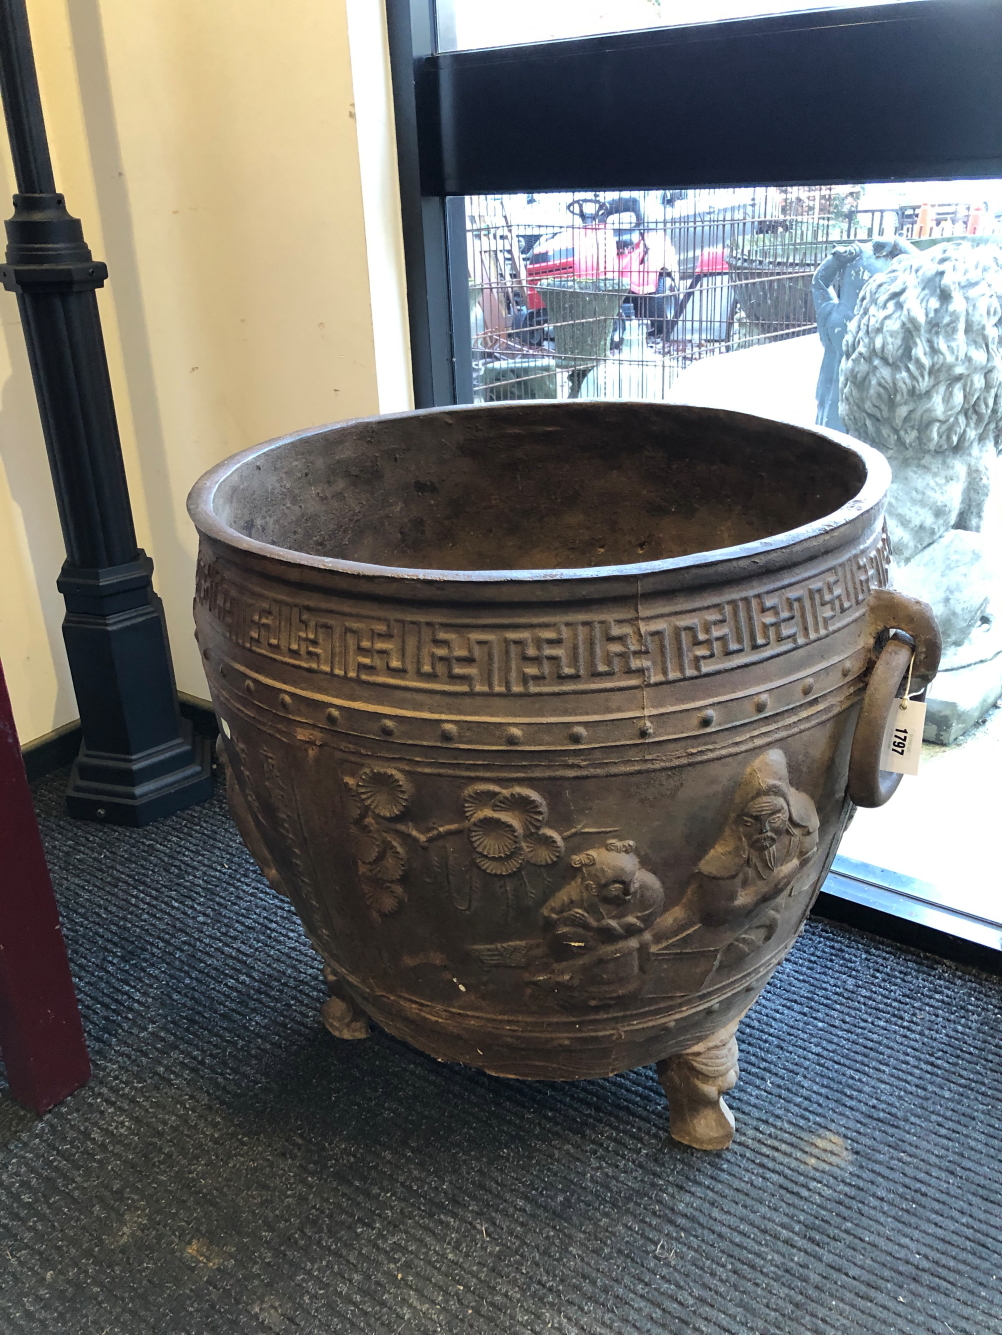 A CHINESE CAST IRON RING HANDLED CAULDRON, THE ROUNDED SIDES CAST WITH FIGURES AND INSCRIPTIONS